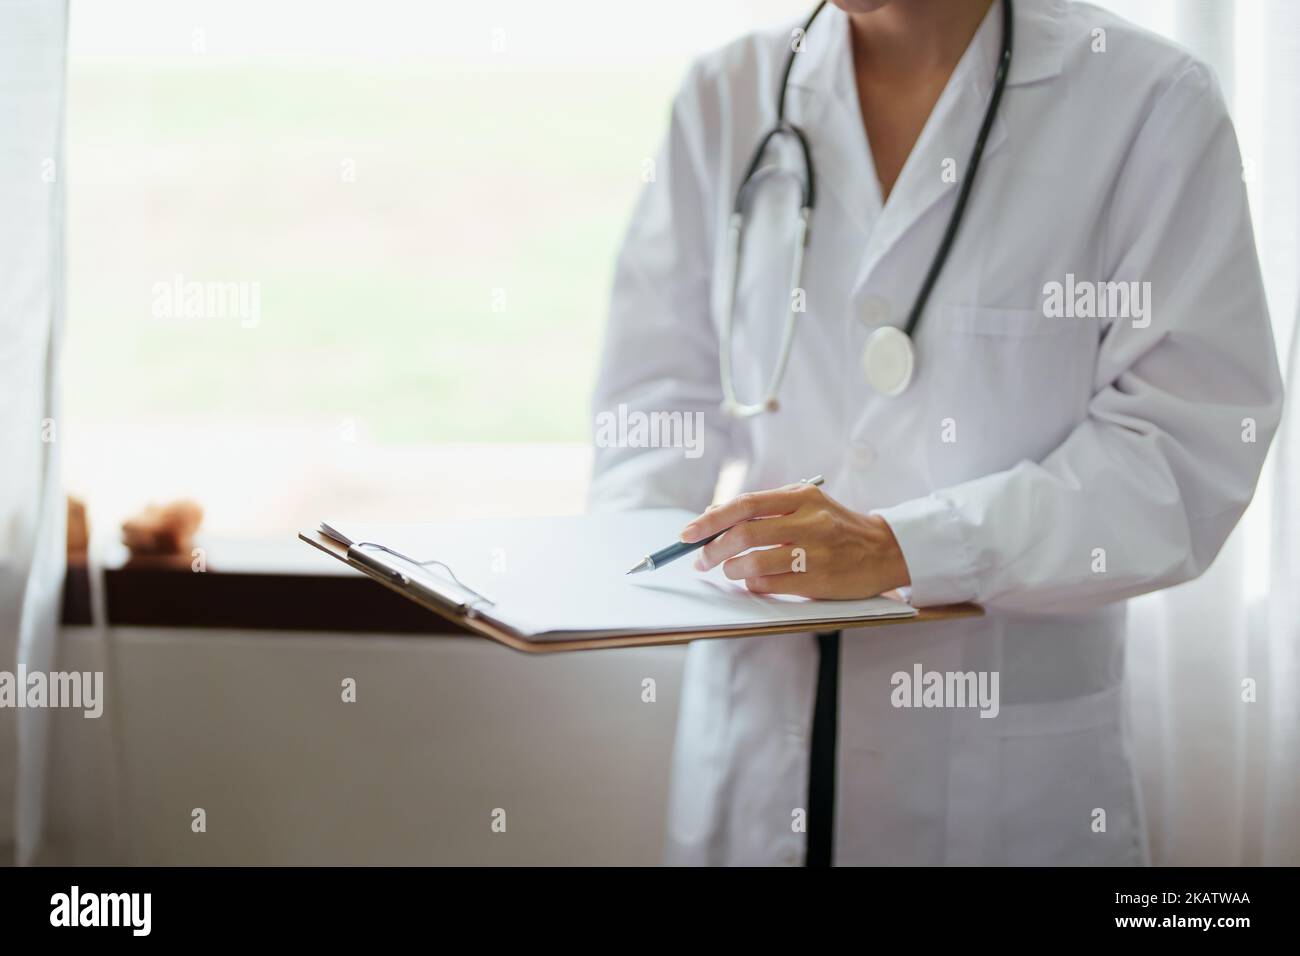 Asian female doctor holding patient information document to analyze the problem of ailments before examination Stock Photo